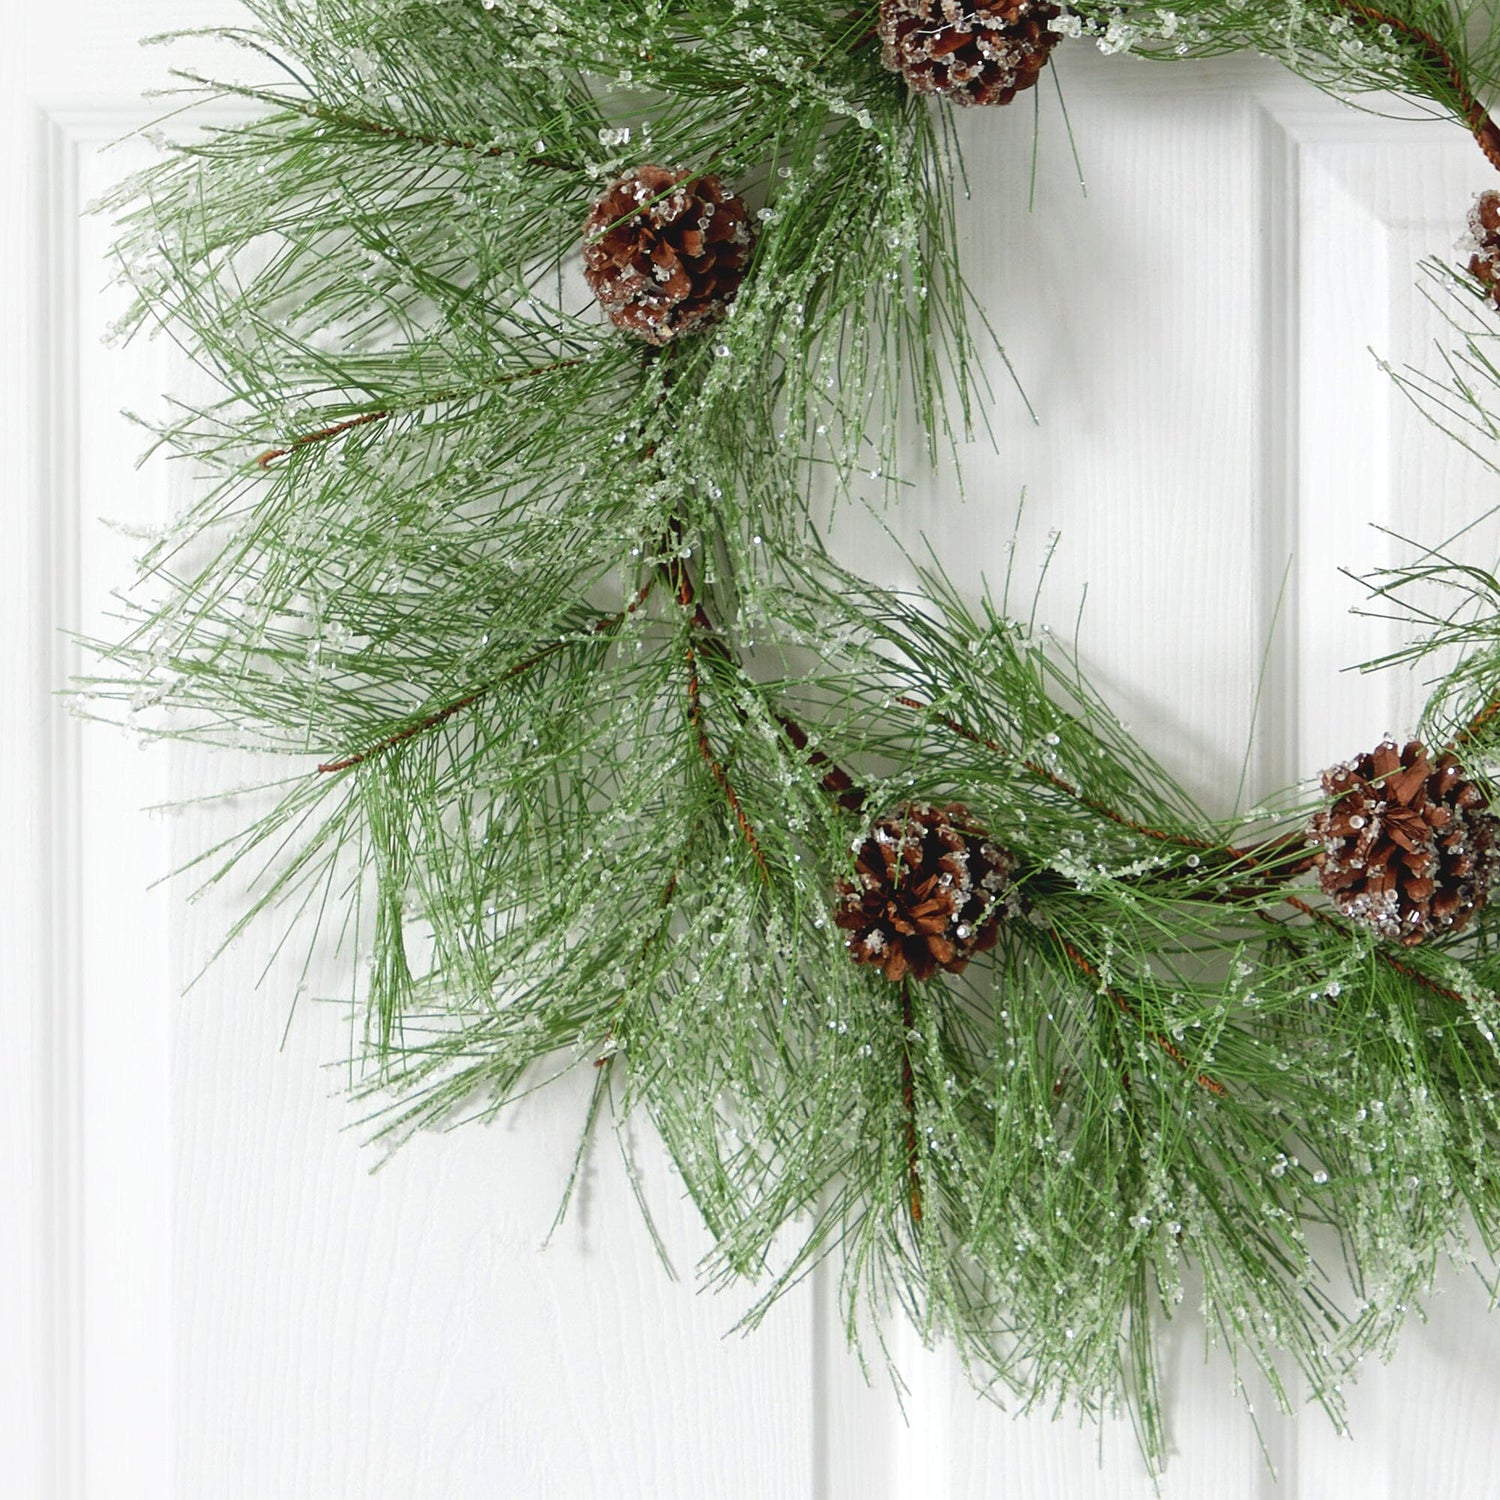 Frosted pine cones sprinkled atop a round evergreen wreath on burlap